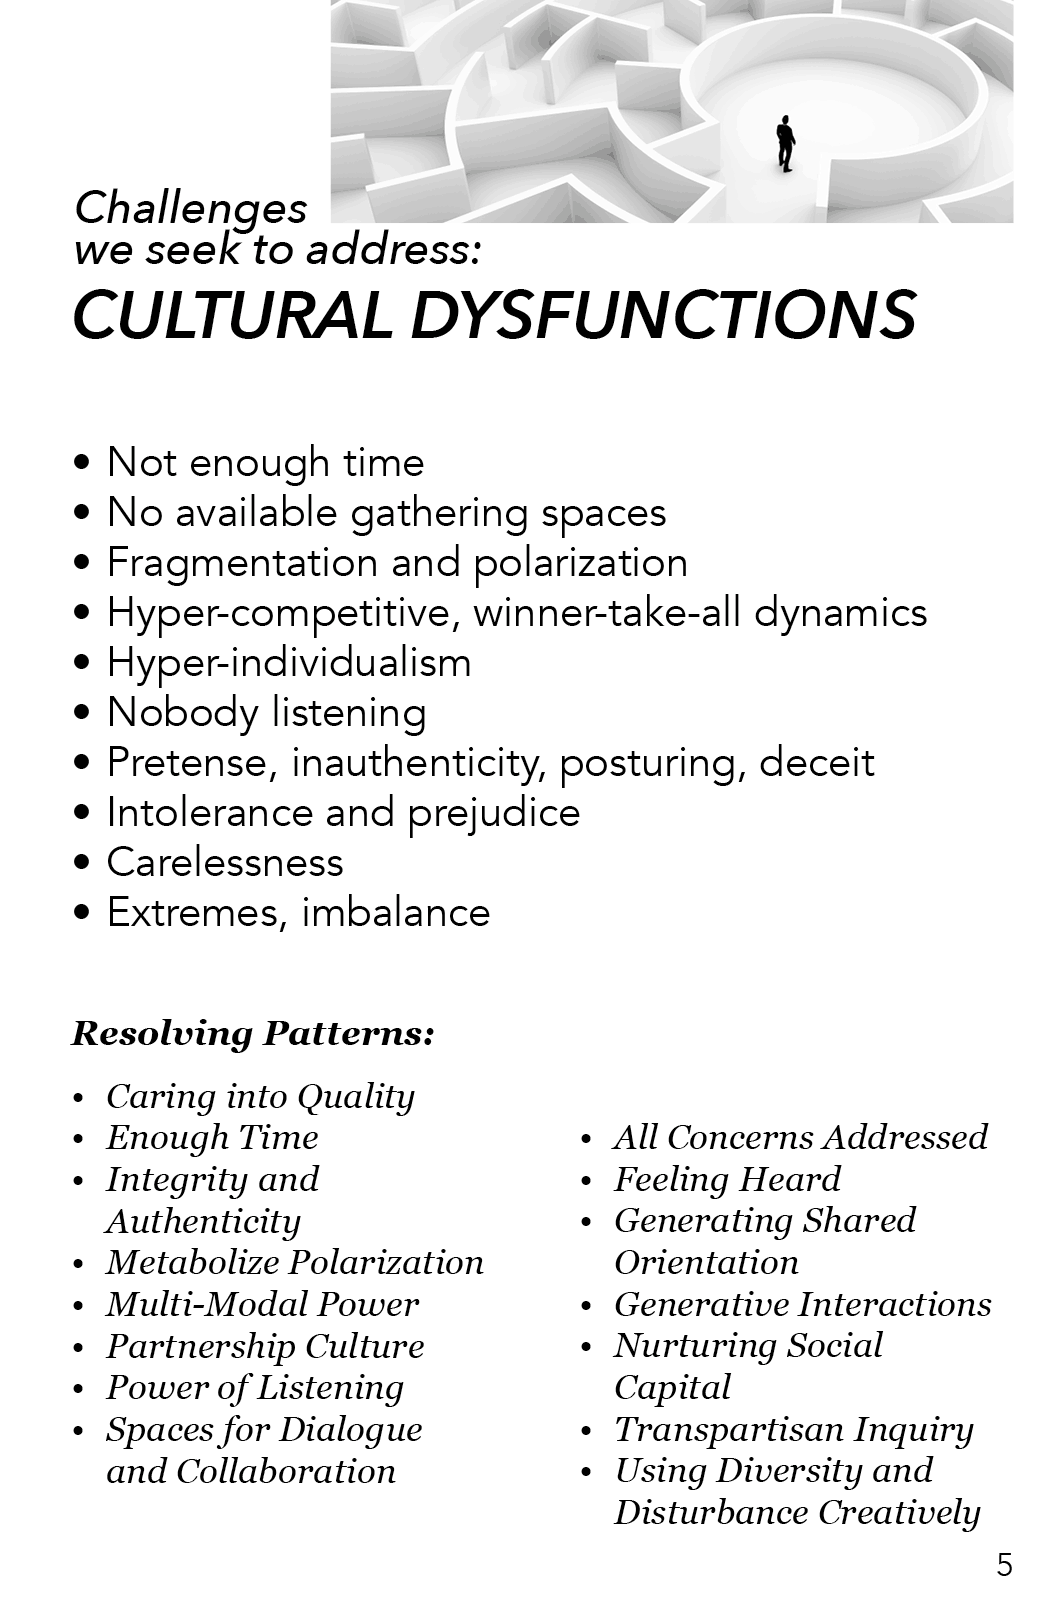 Challenge to address - Cultural Dysfuntions